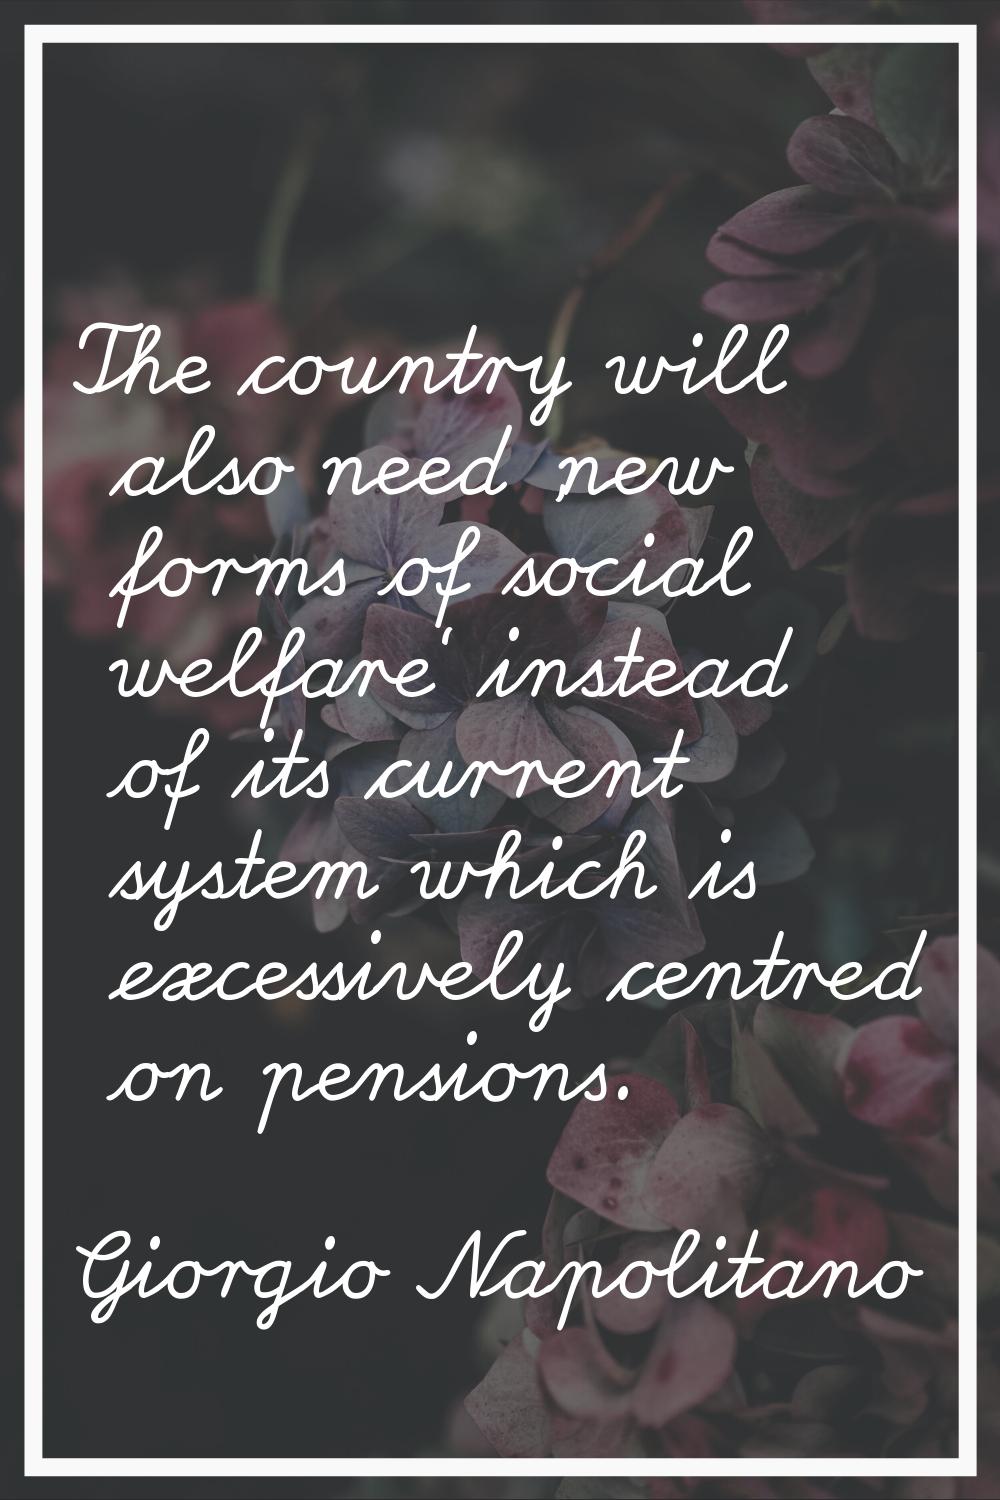 The country will also need 'new forms of social welfare' instead of its current system which is exc